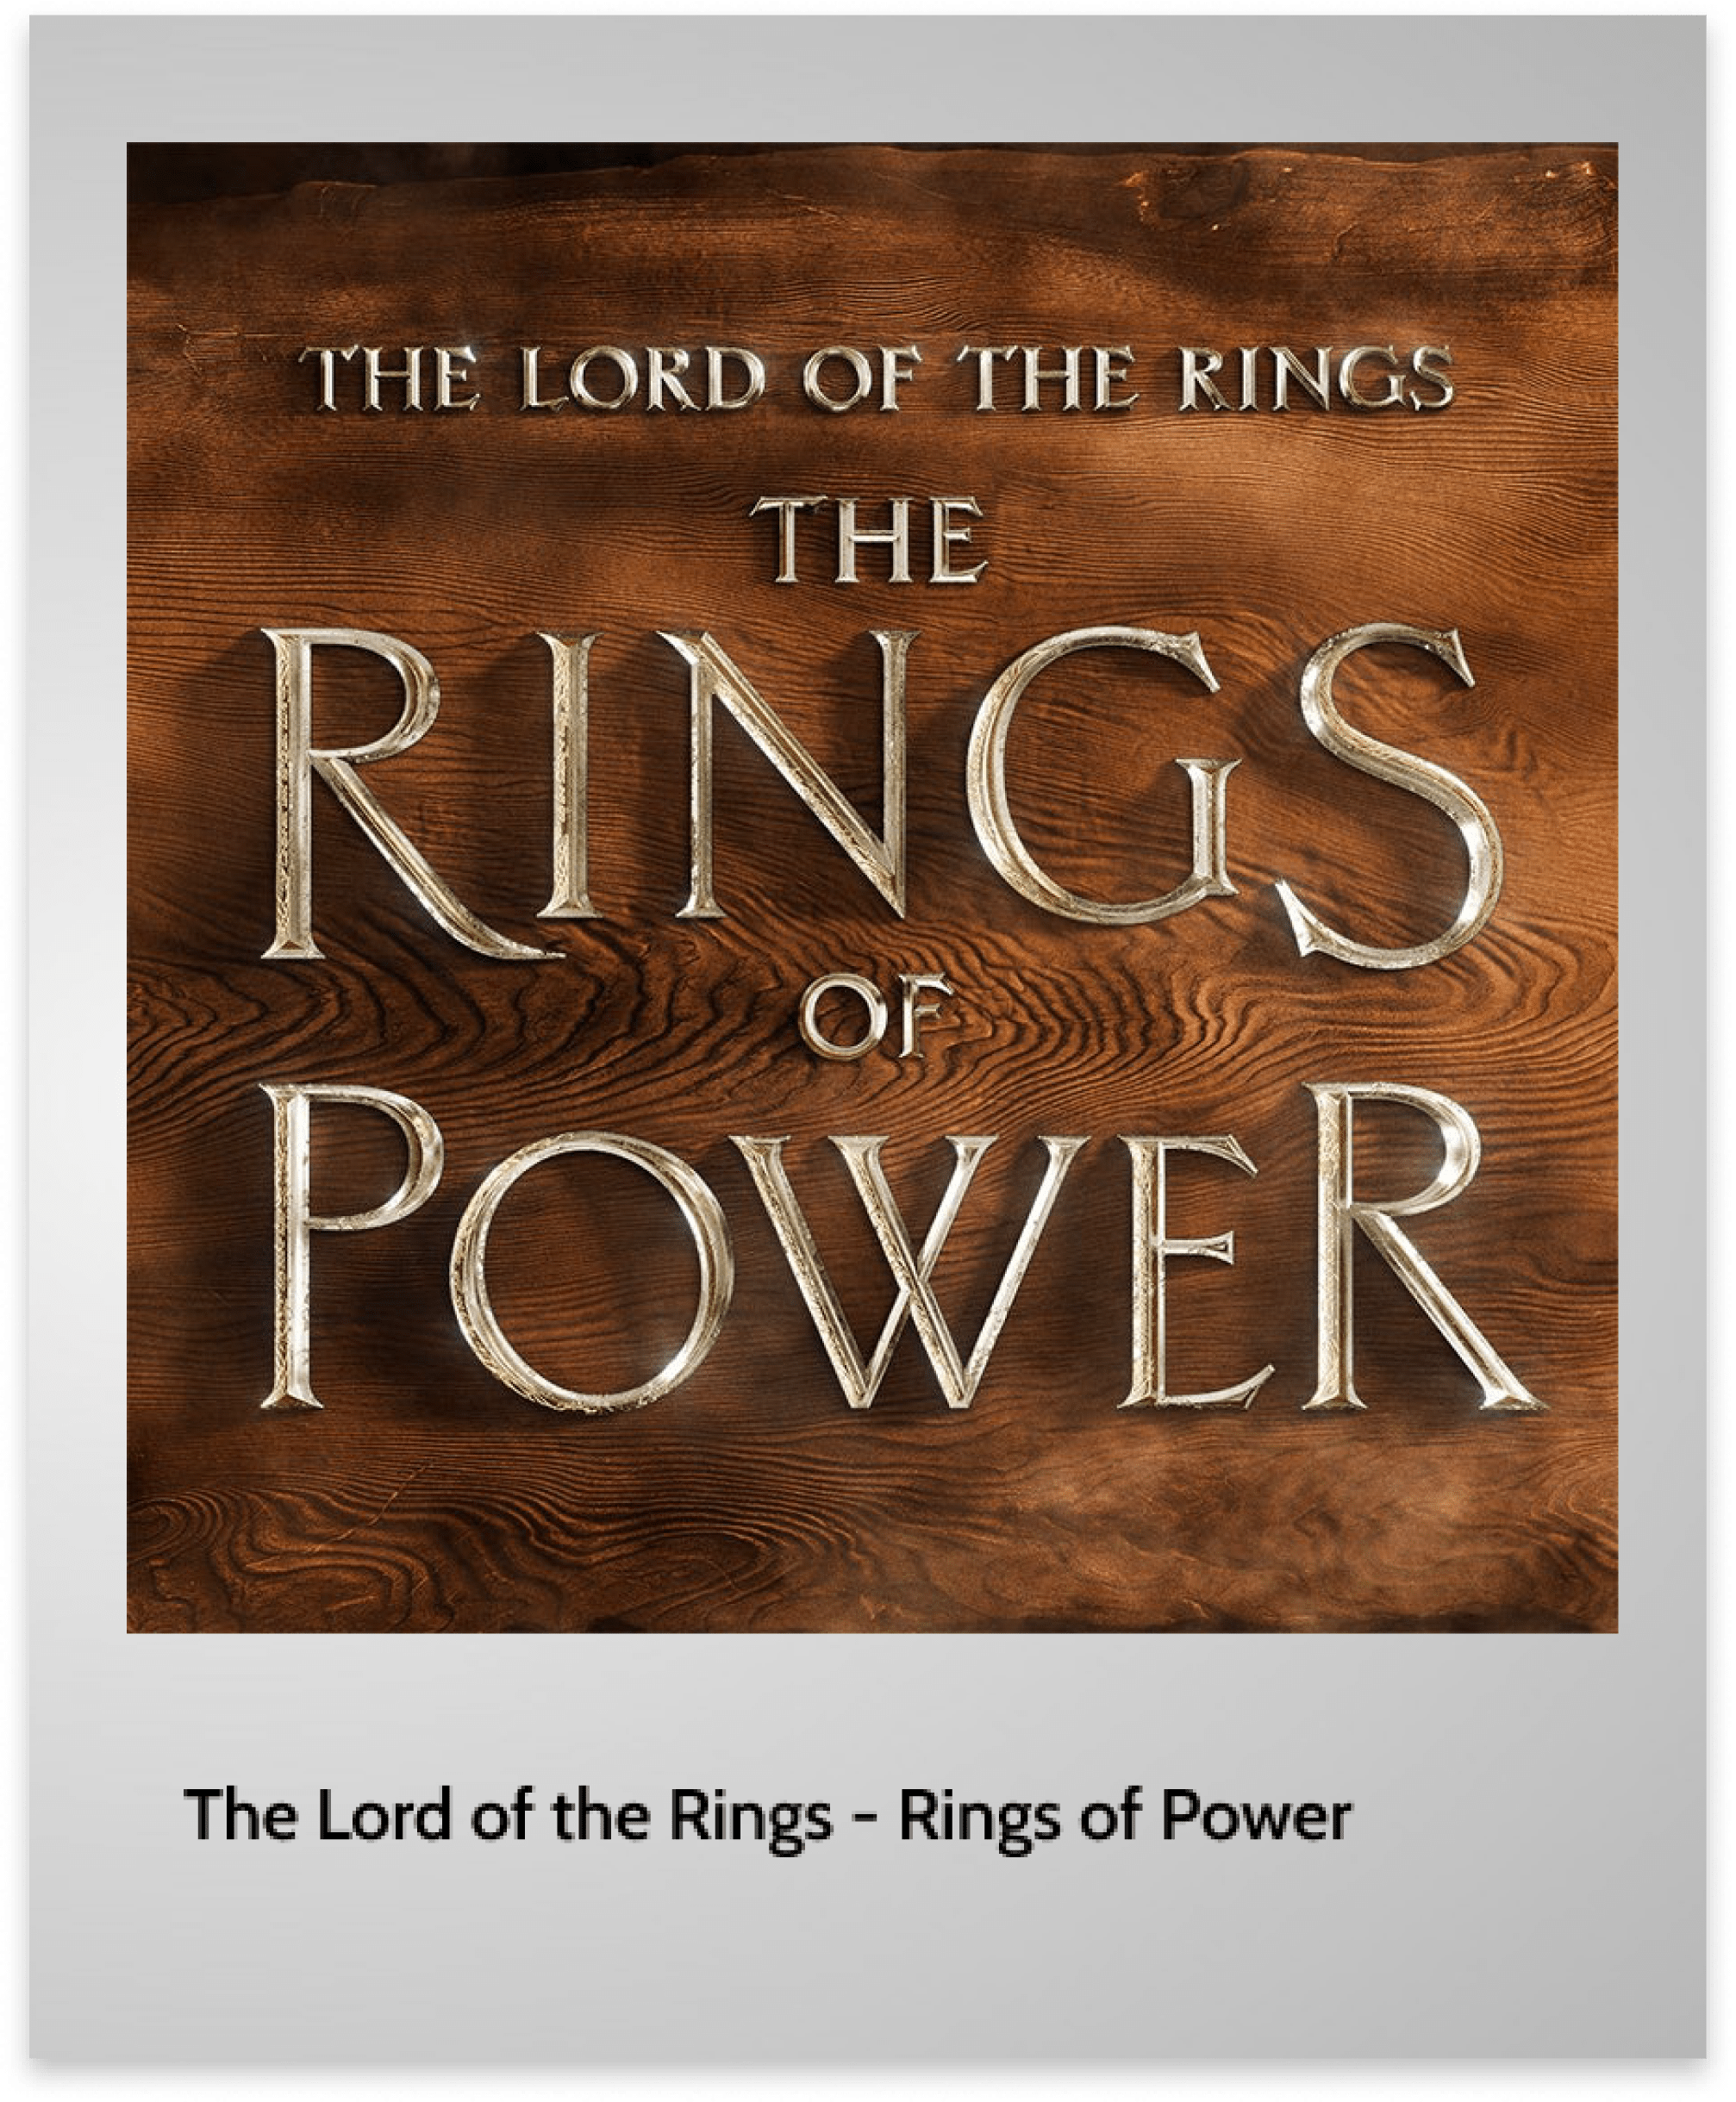 The Lord of the Rings – Rings of Power